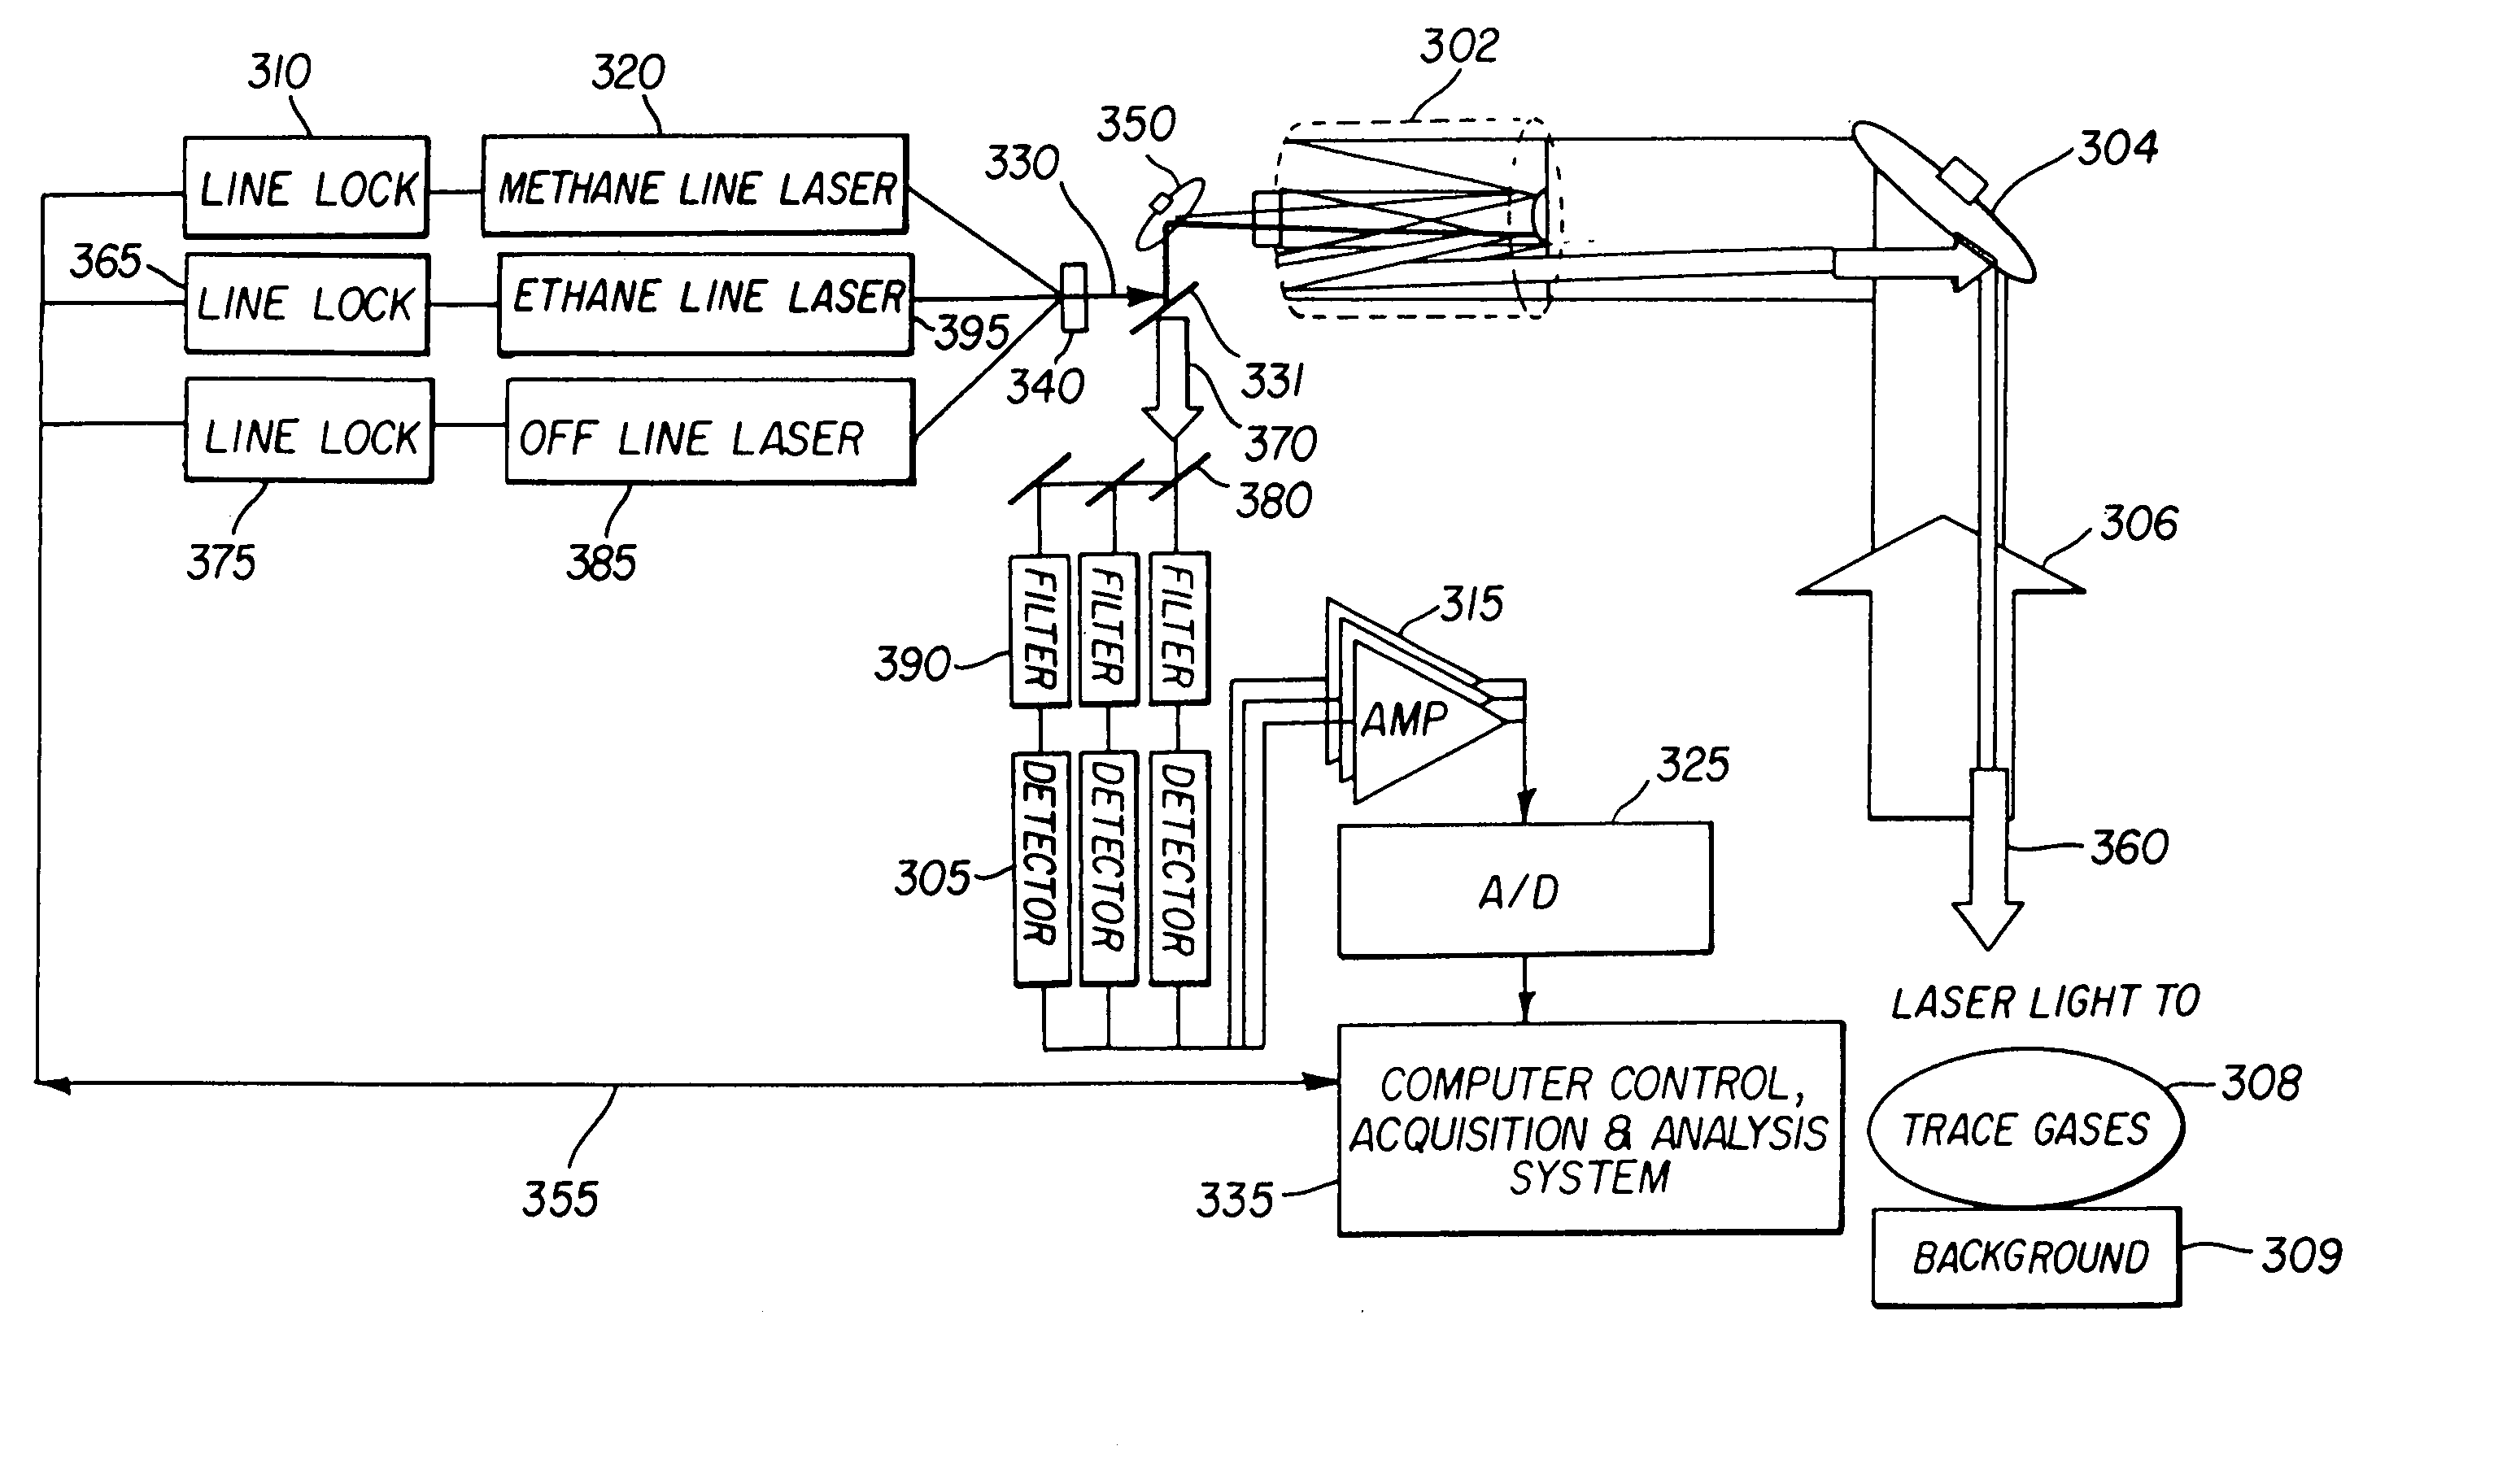 System and method for remote quantitative detection of fluid leaks from a natural gas or oil pipeline